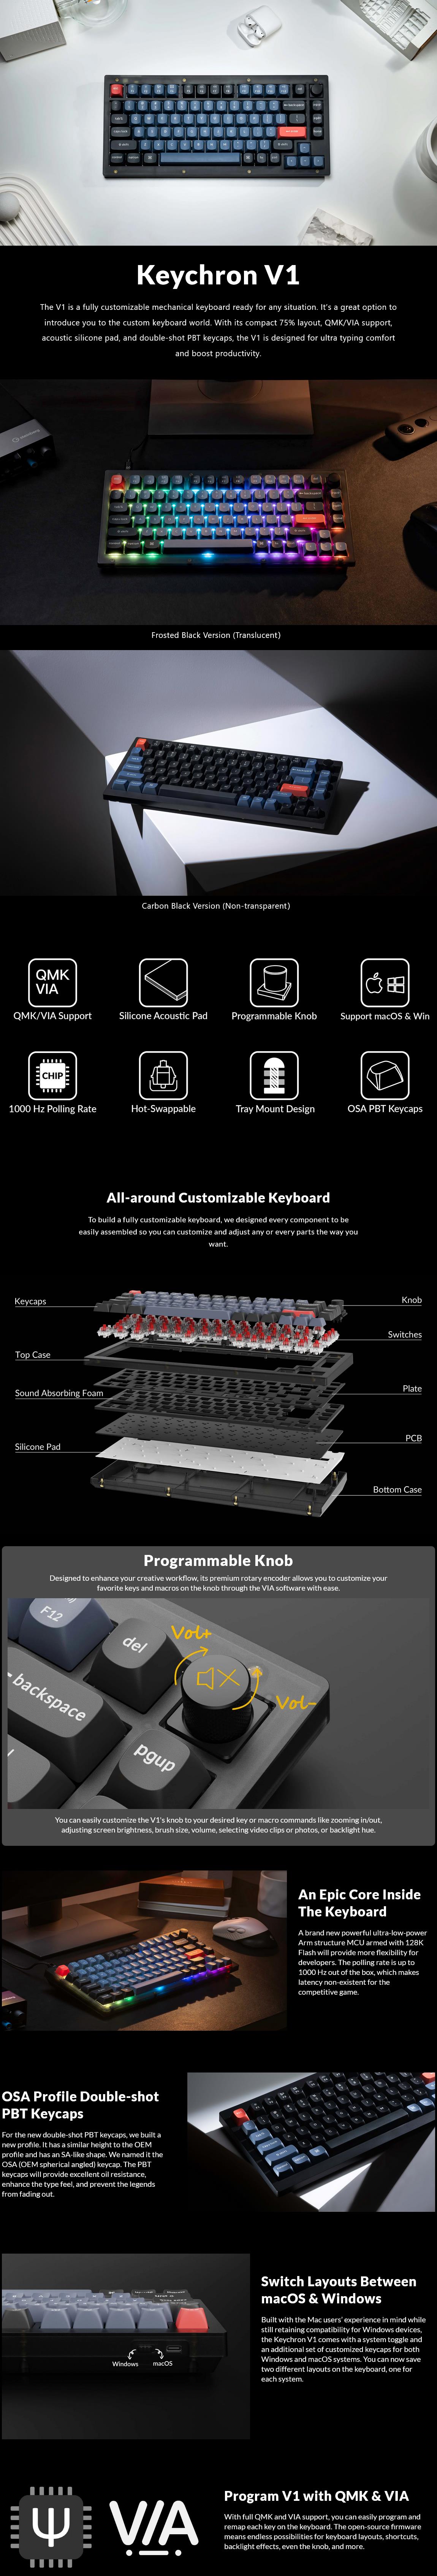 A large marketing image providing additional information about the product Keychron V1 RGB 75% Mechanical Keyboard - Frosted Black (Brown Switch) - Additional alt info not provided